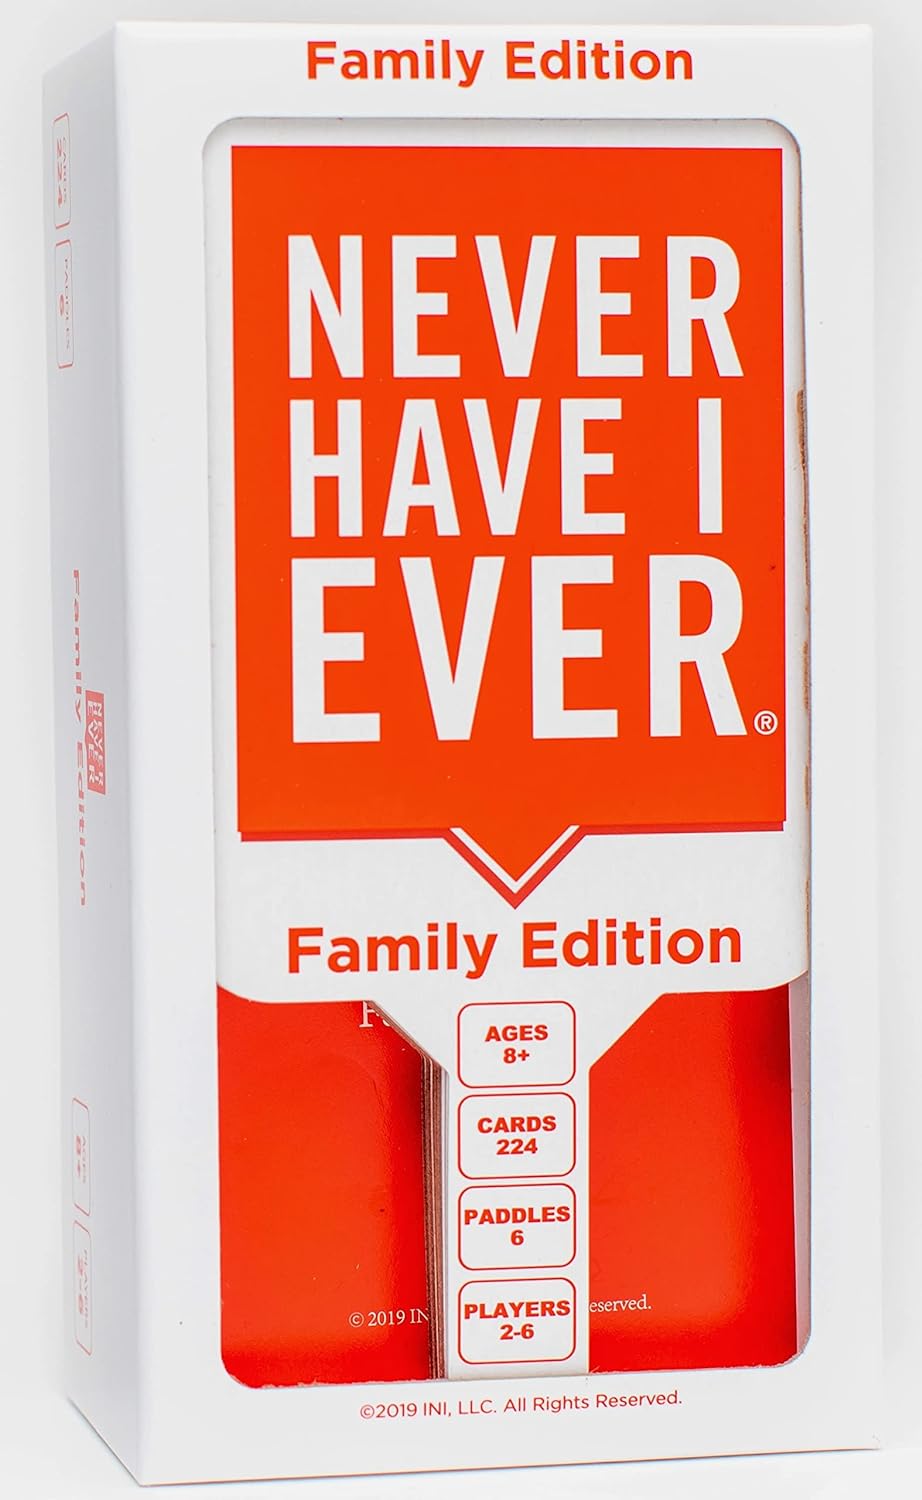 Never Have I Ever Family Edition Card Game Set Vol 2 | Fun Family Game Night Party Games for Kids and Adults | for 2+ Players | Ages 8 +